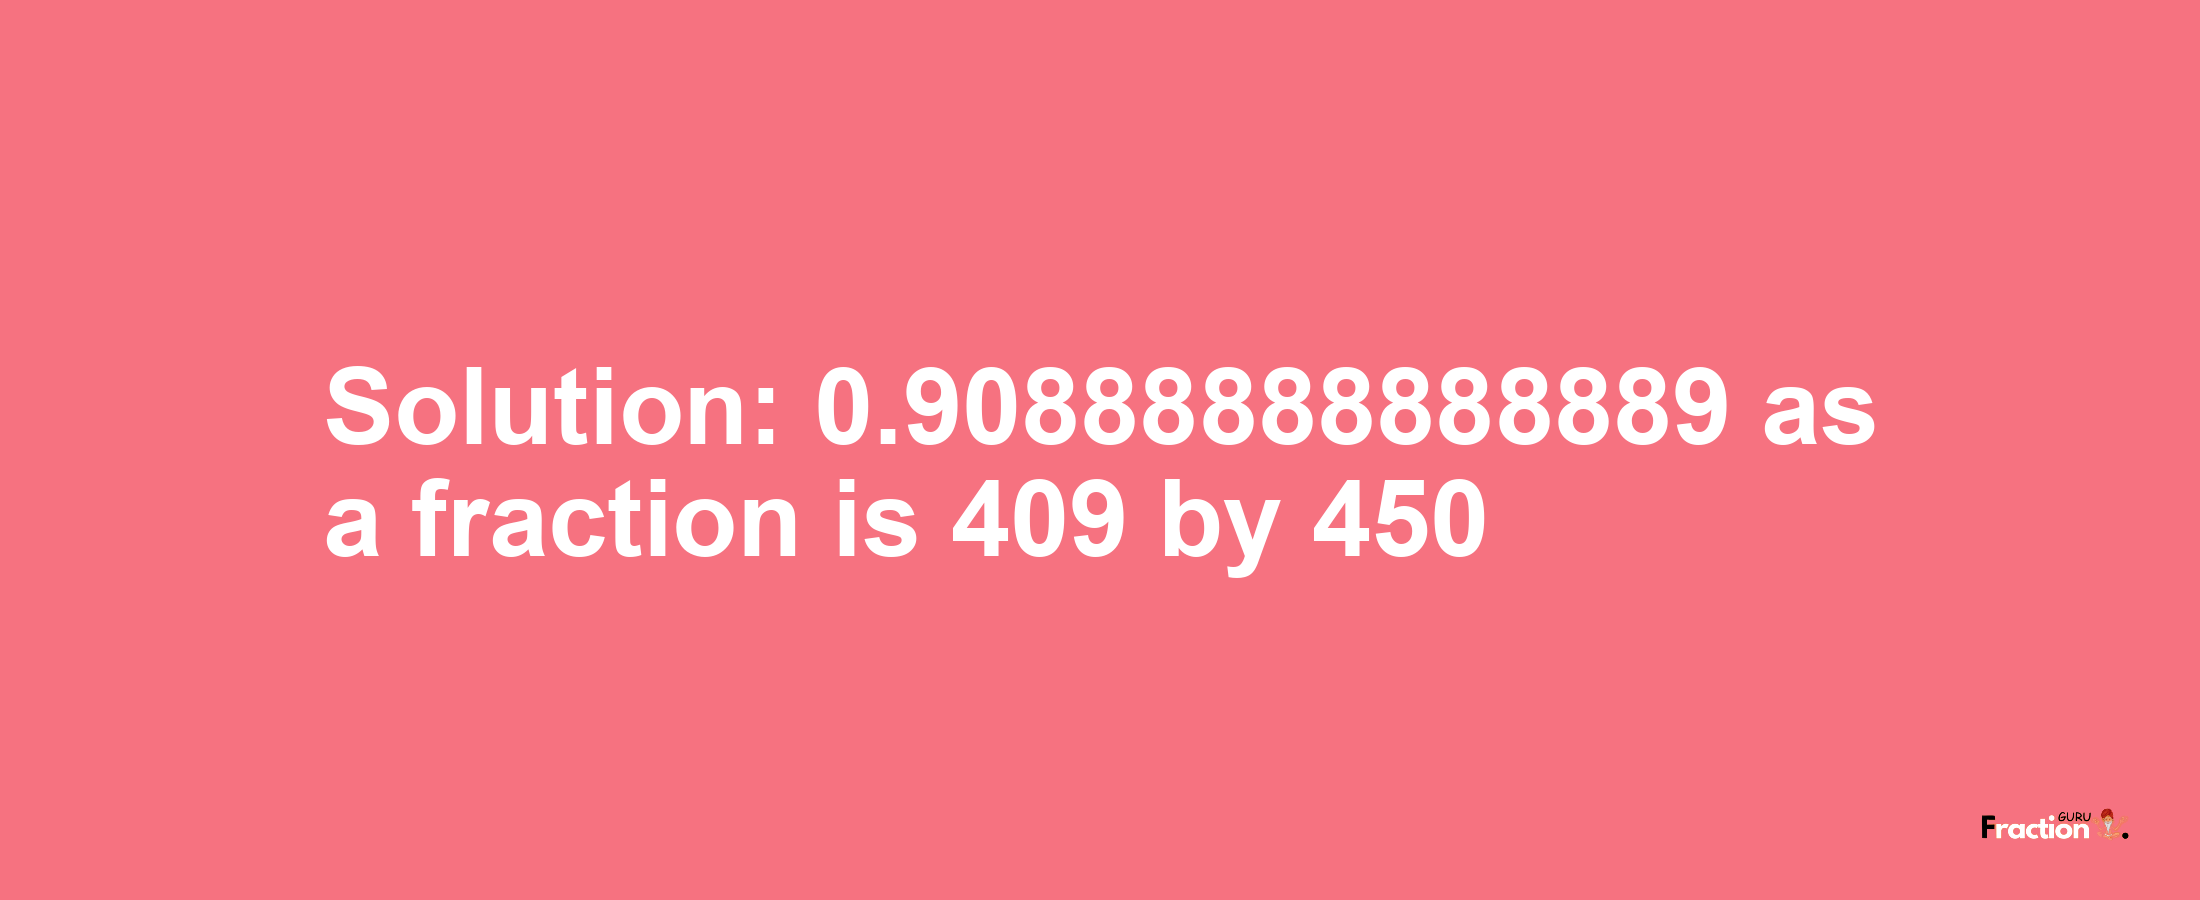 Solution:0.90888888888889 as a fraction is 409/450